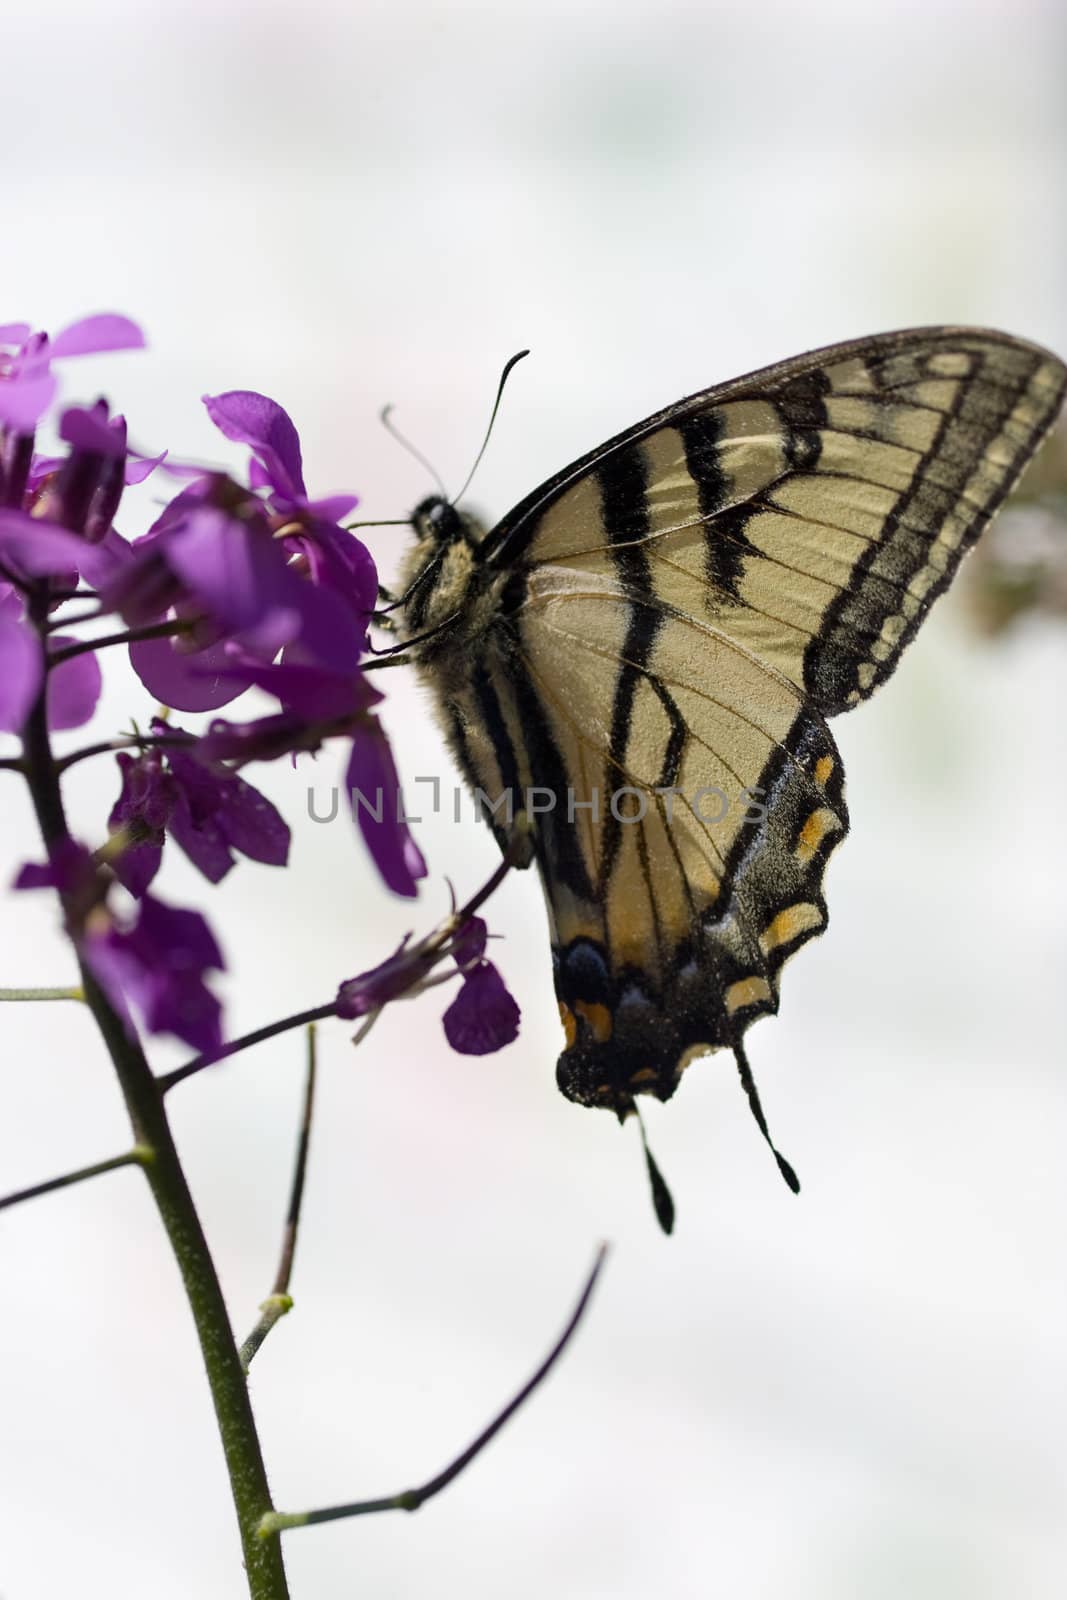 A butterfly resting on a branch with purple flowers.